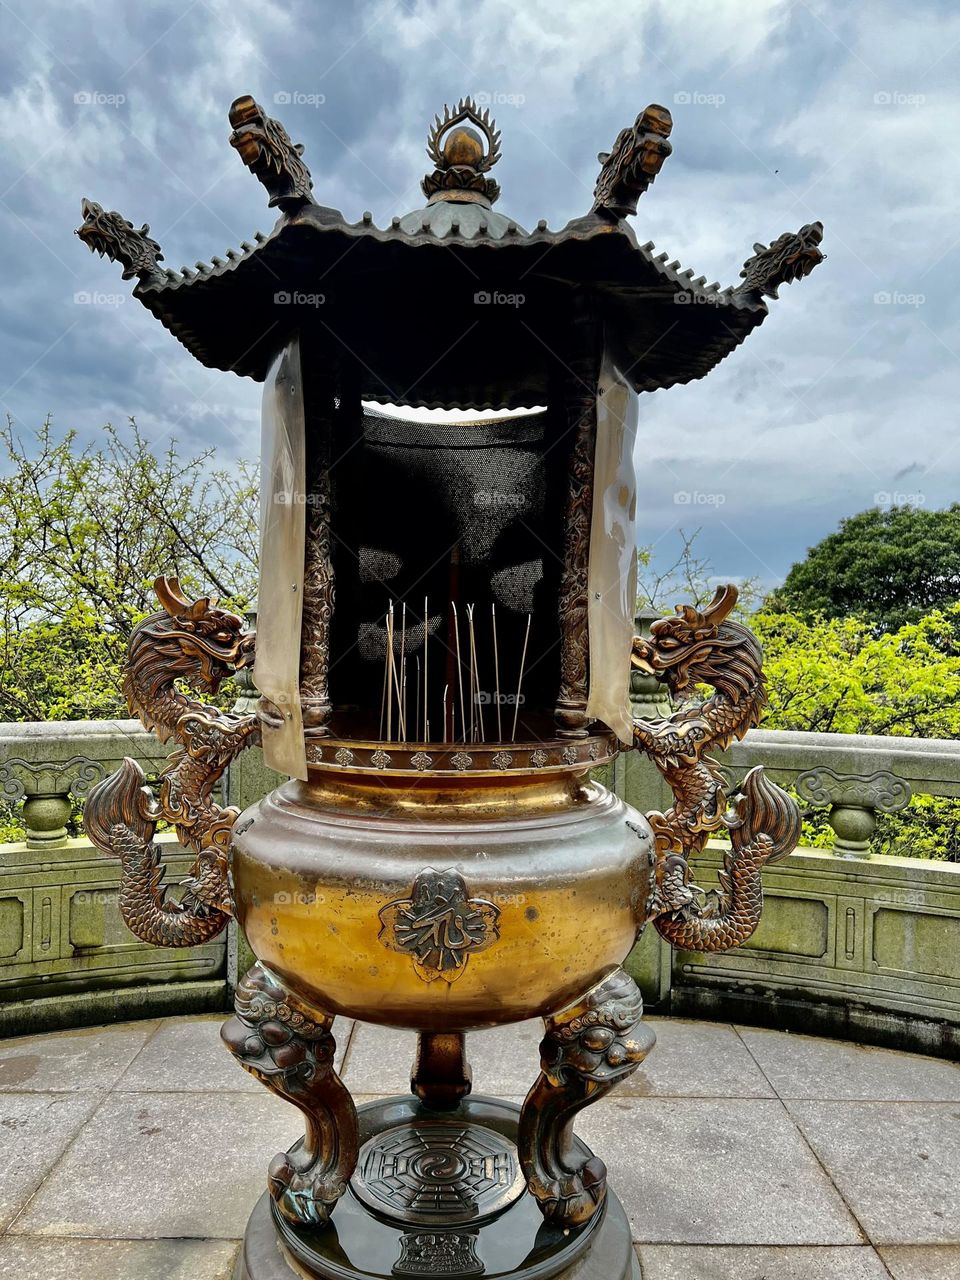 Incense burner outdoor with beautiful sky